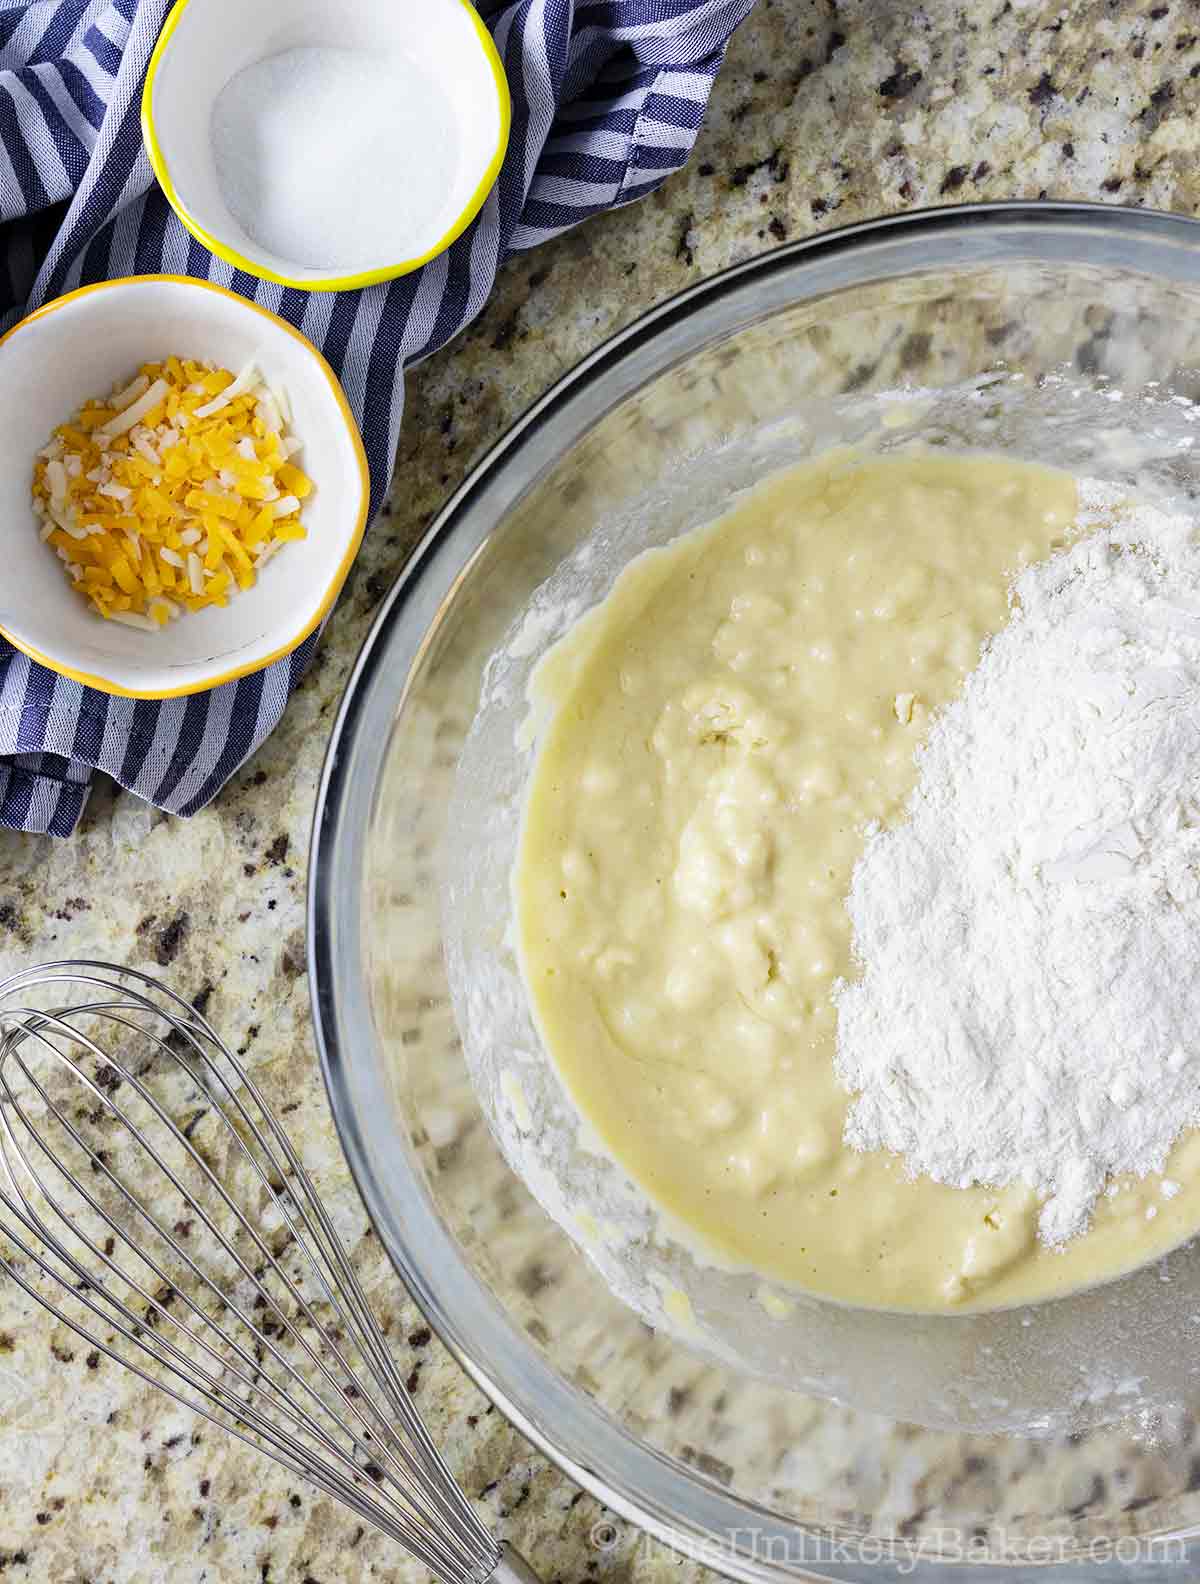 Flour added to wet ingredients in a bowl.